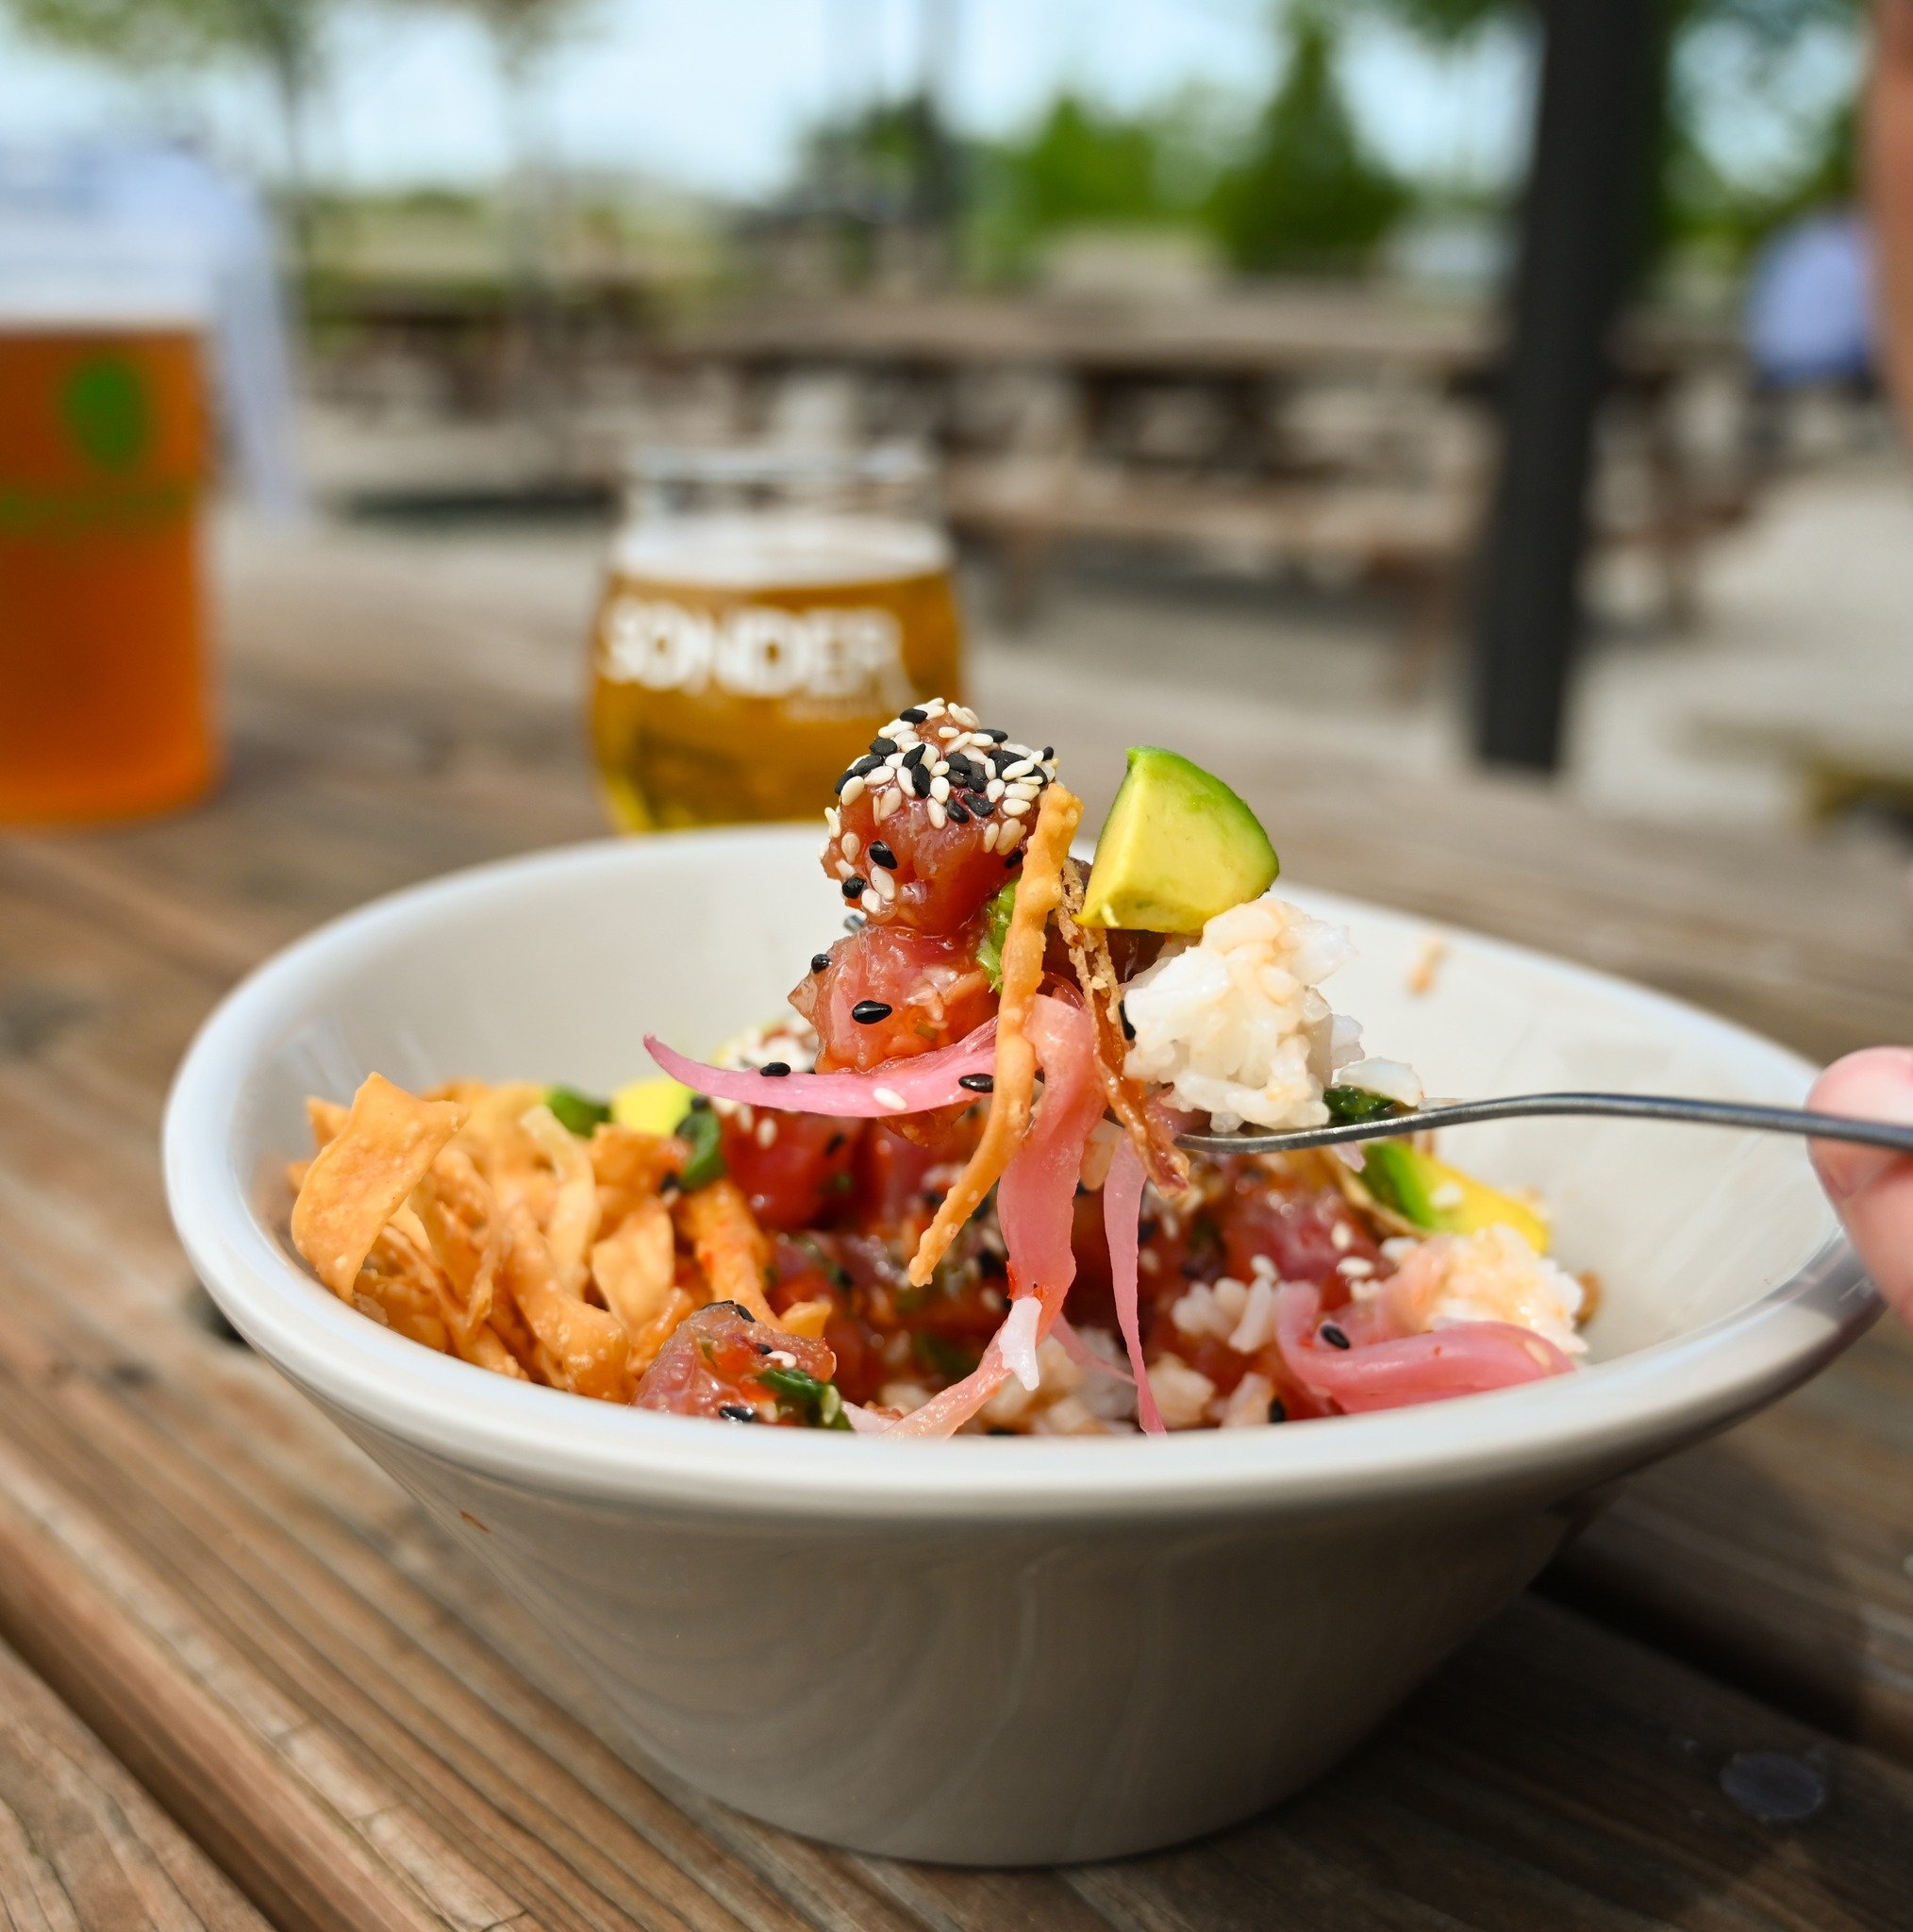 Our Poke Bowl is packed with flavor! This bowl has Ahi Tuna, Avocado, Green Onion, Fried Wontons, Fried Shallots, Mae Ploy (a mild sweet chili sauce), Nori (a type of seaweed), CinSoy Chili Crisp, all on top of a bed of Jasmine Rice. Stop by today to